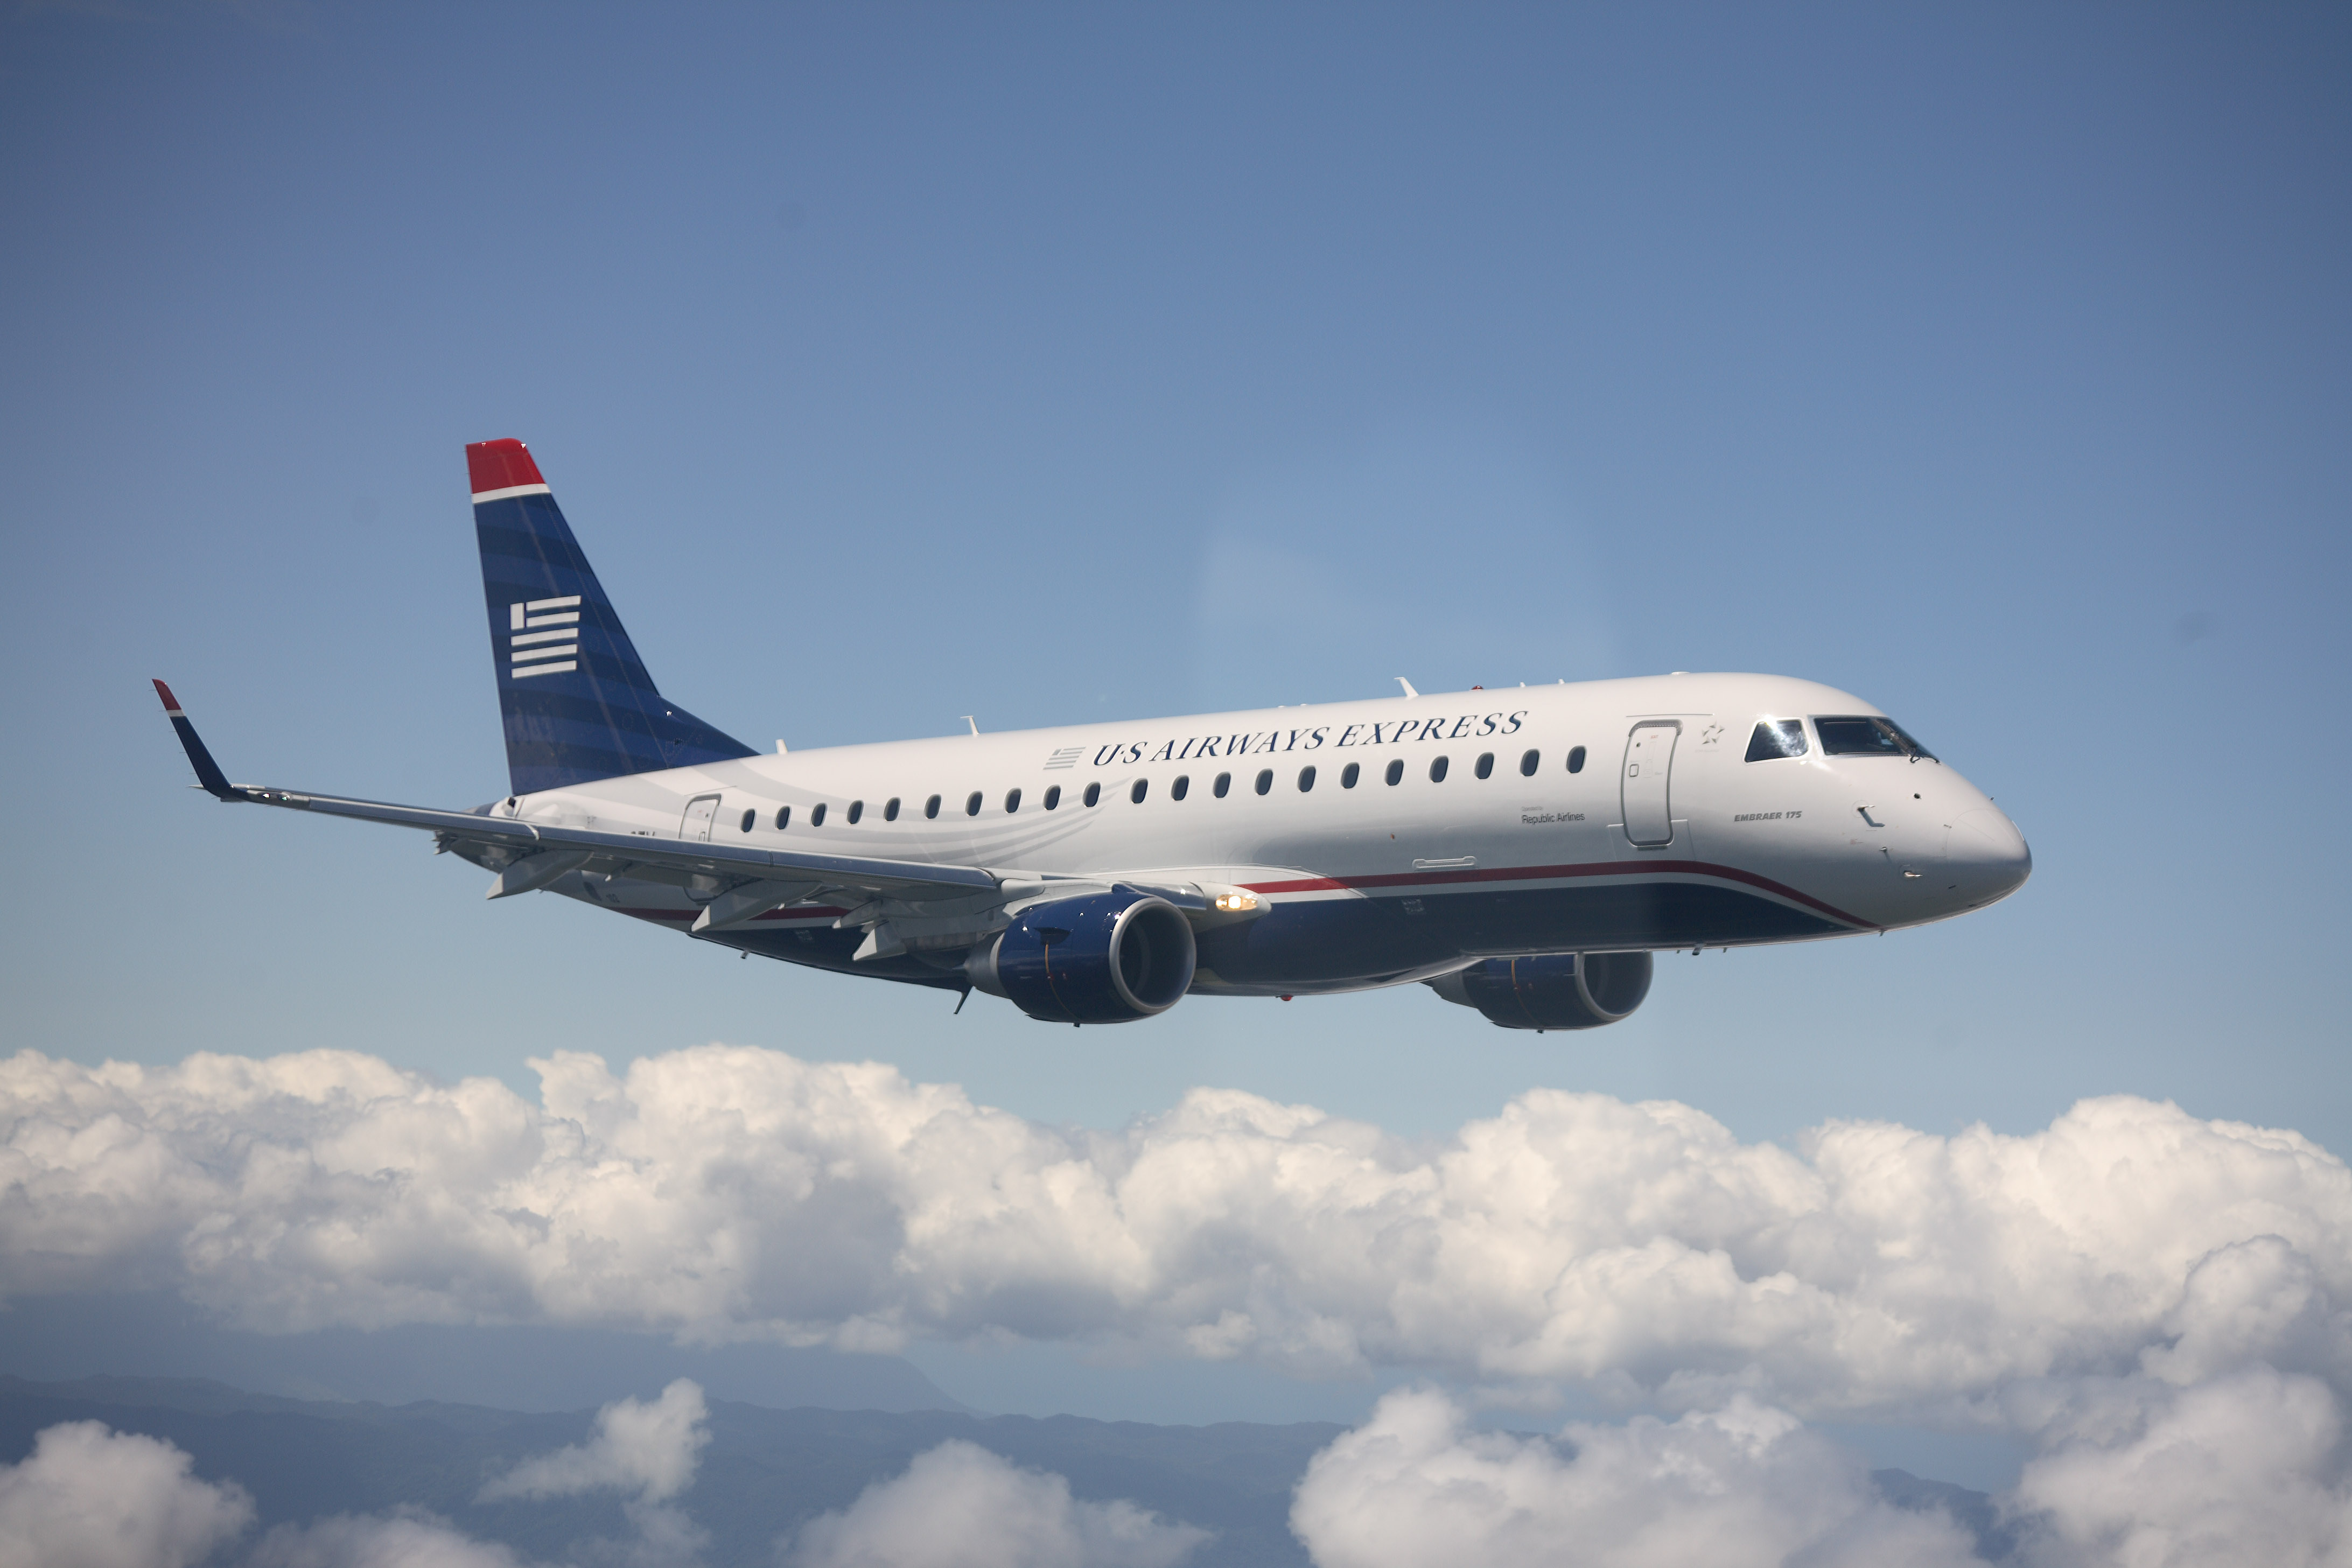 No foreign transaction fees with the US Airways MasterCard